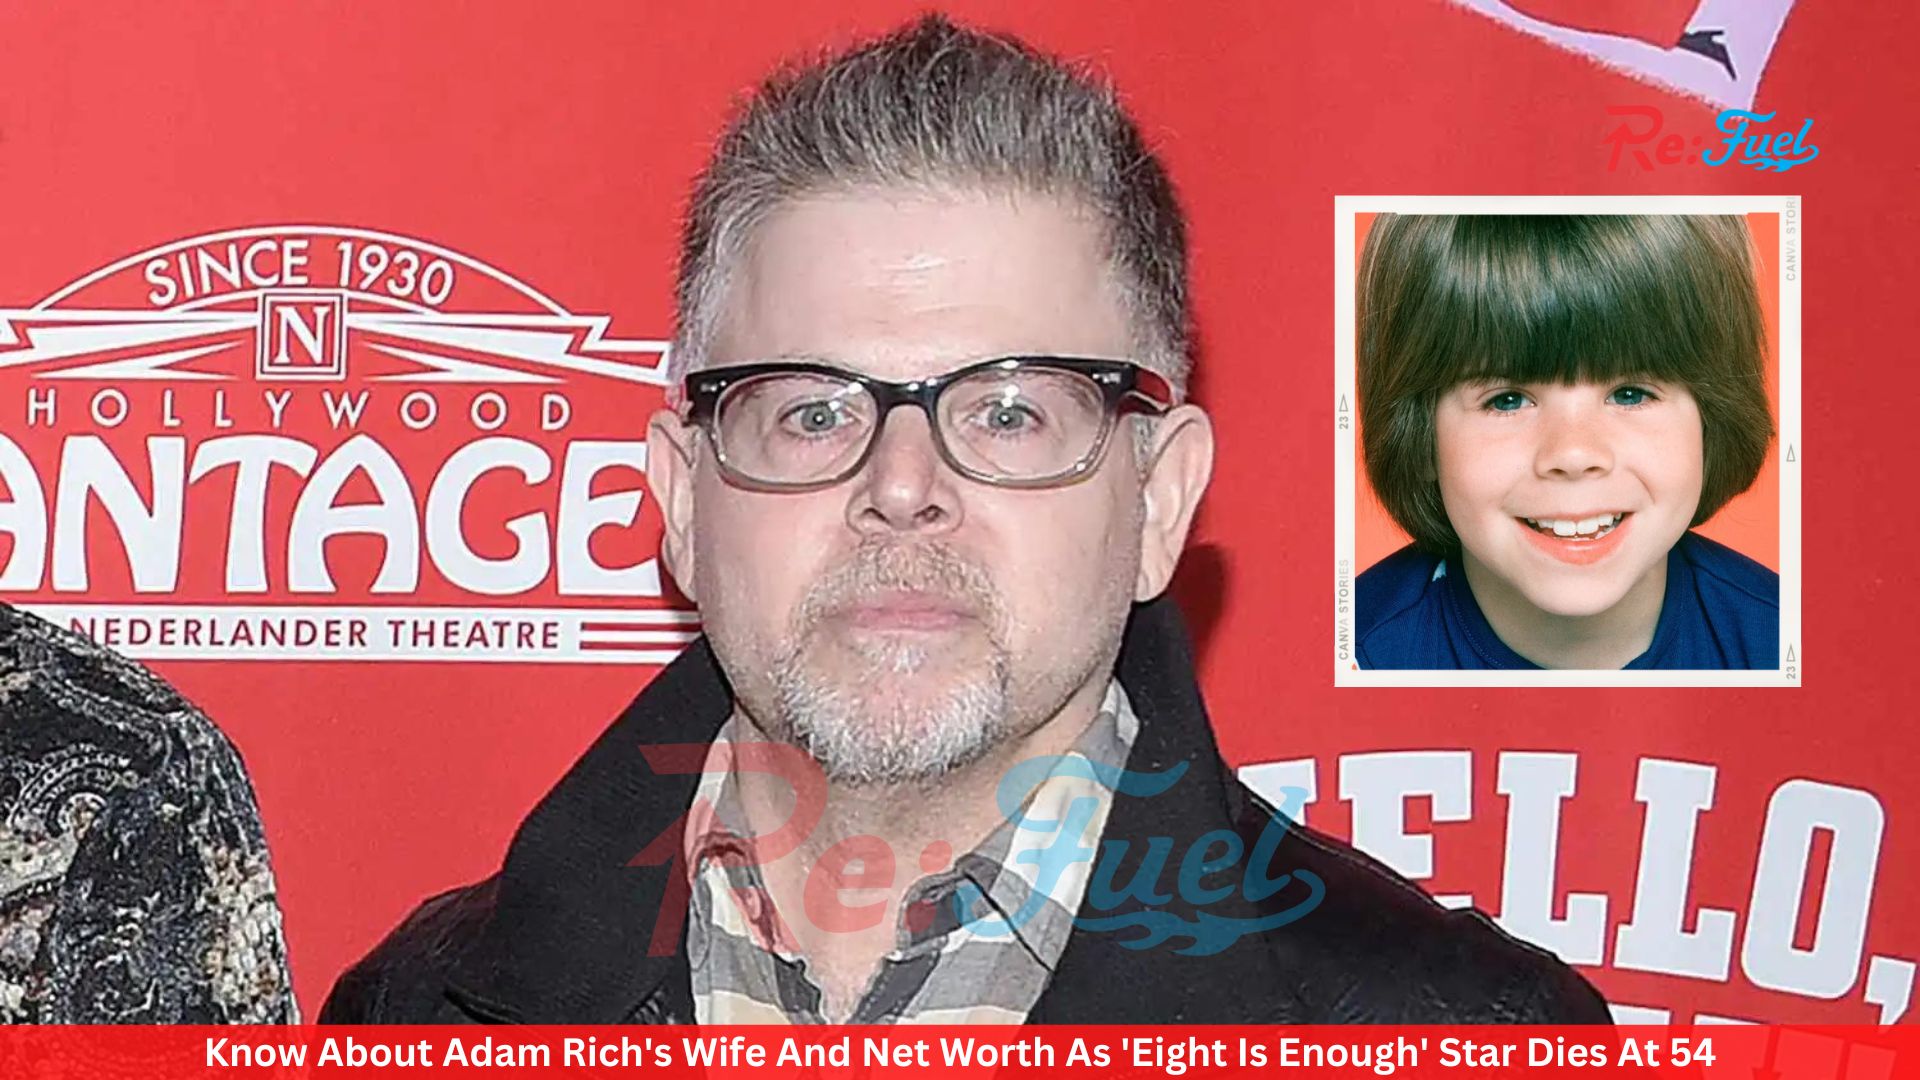 Know About Adam Rich's Wife And Net Worth As 'Eight Is Enough' Star Dies At 54